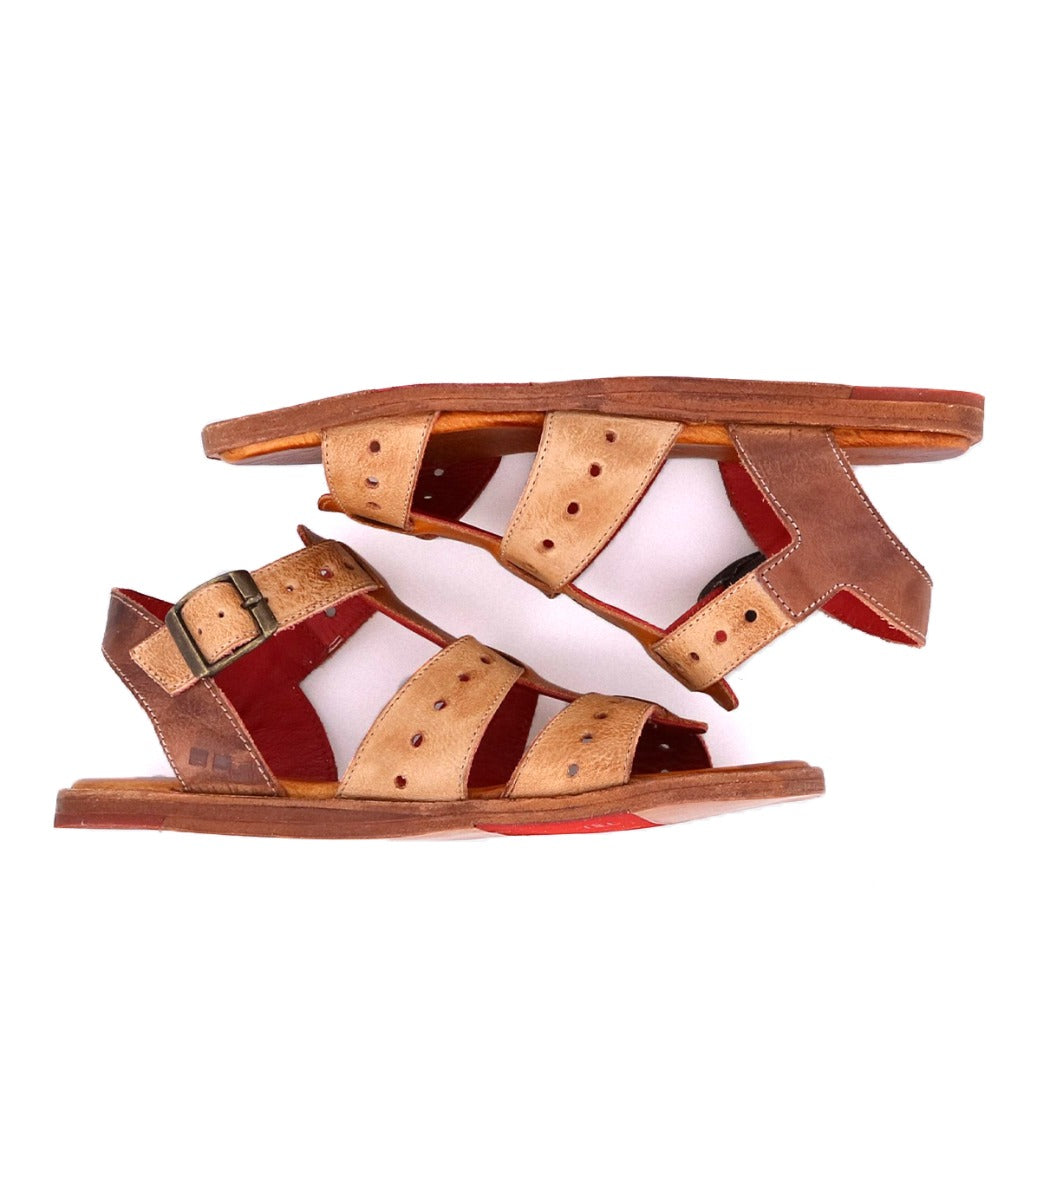 A pair of Sue sandals with straps and buckles by Bed Stu.